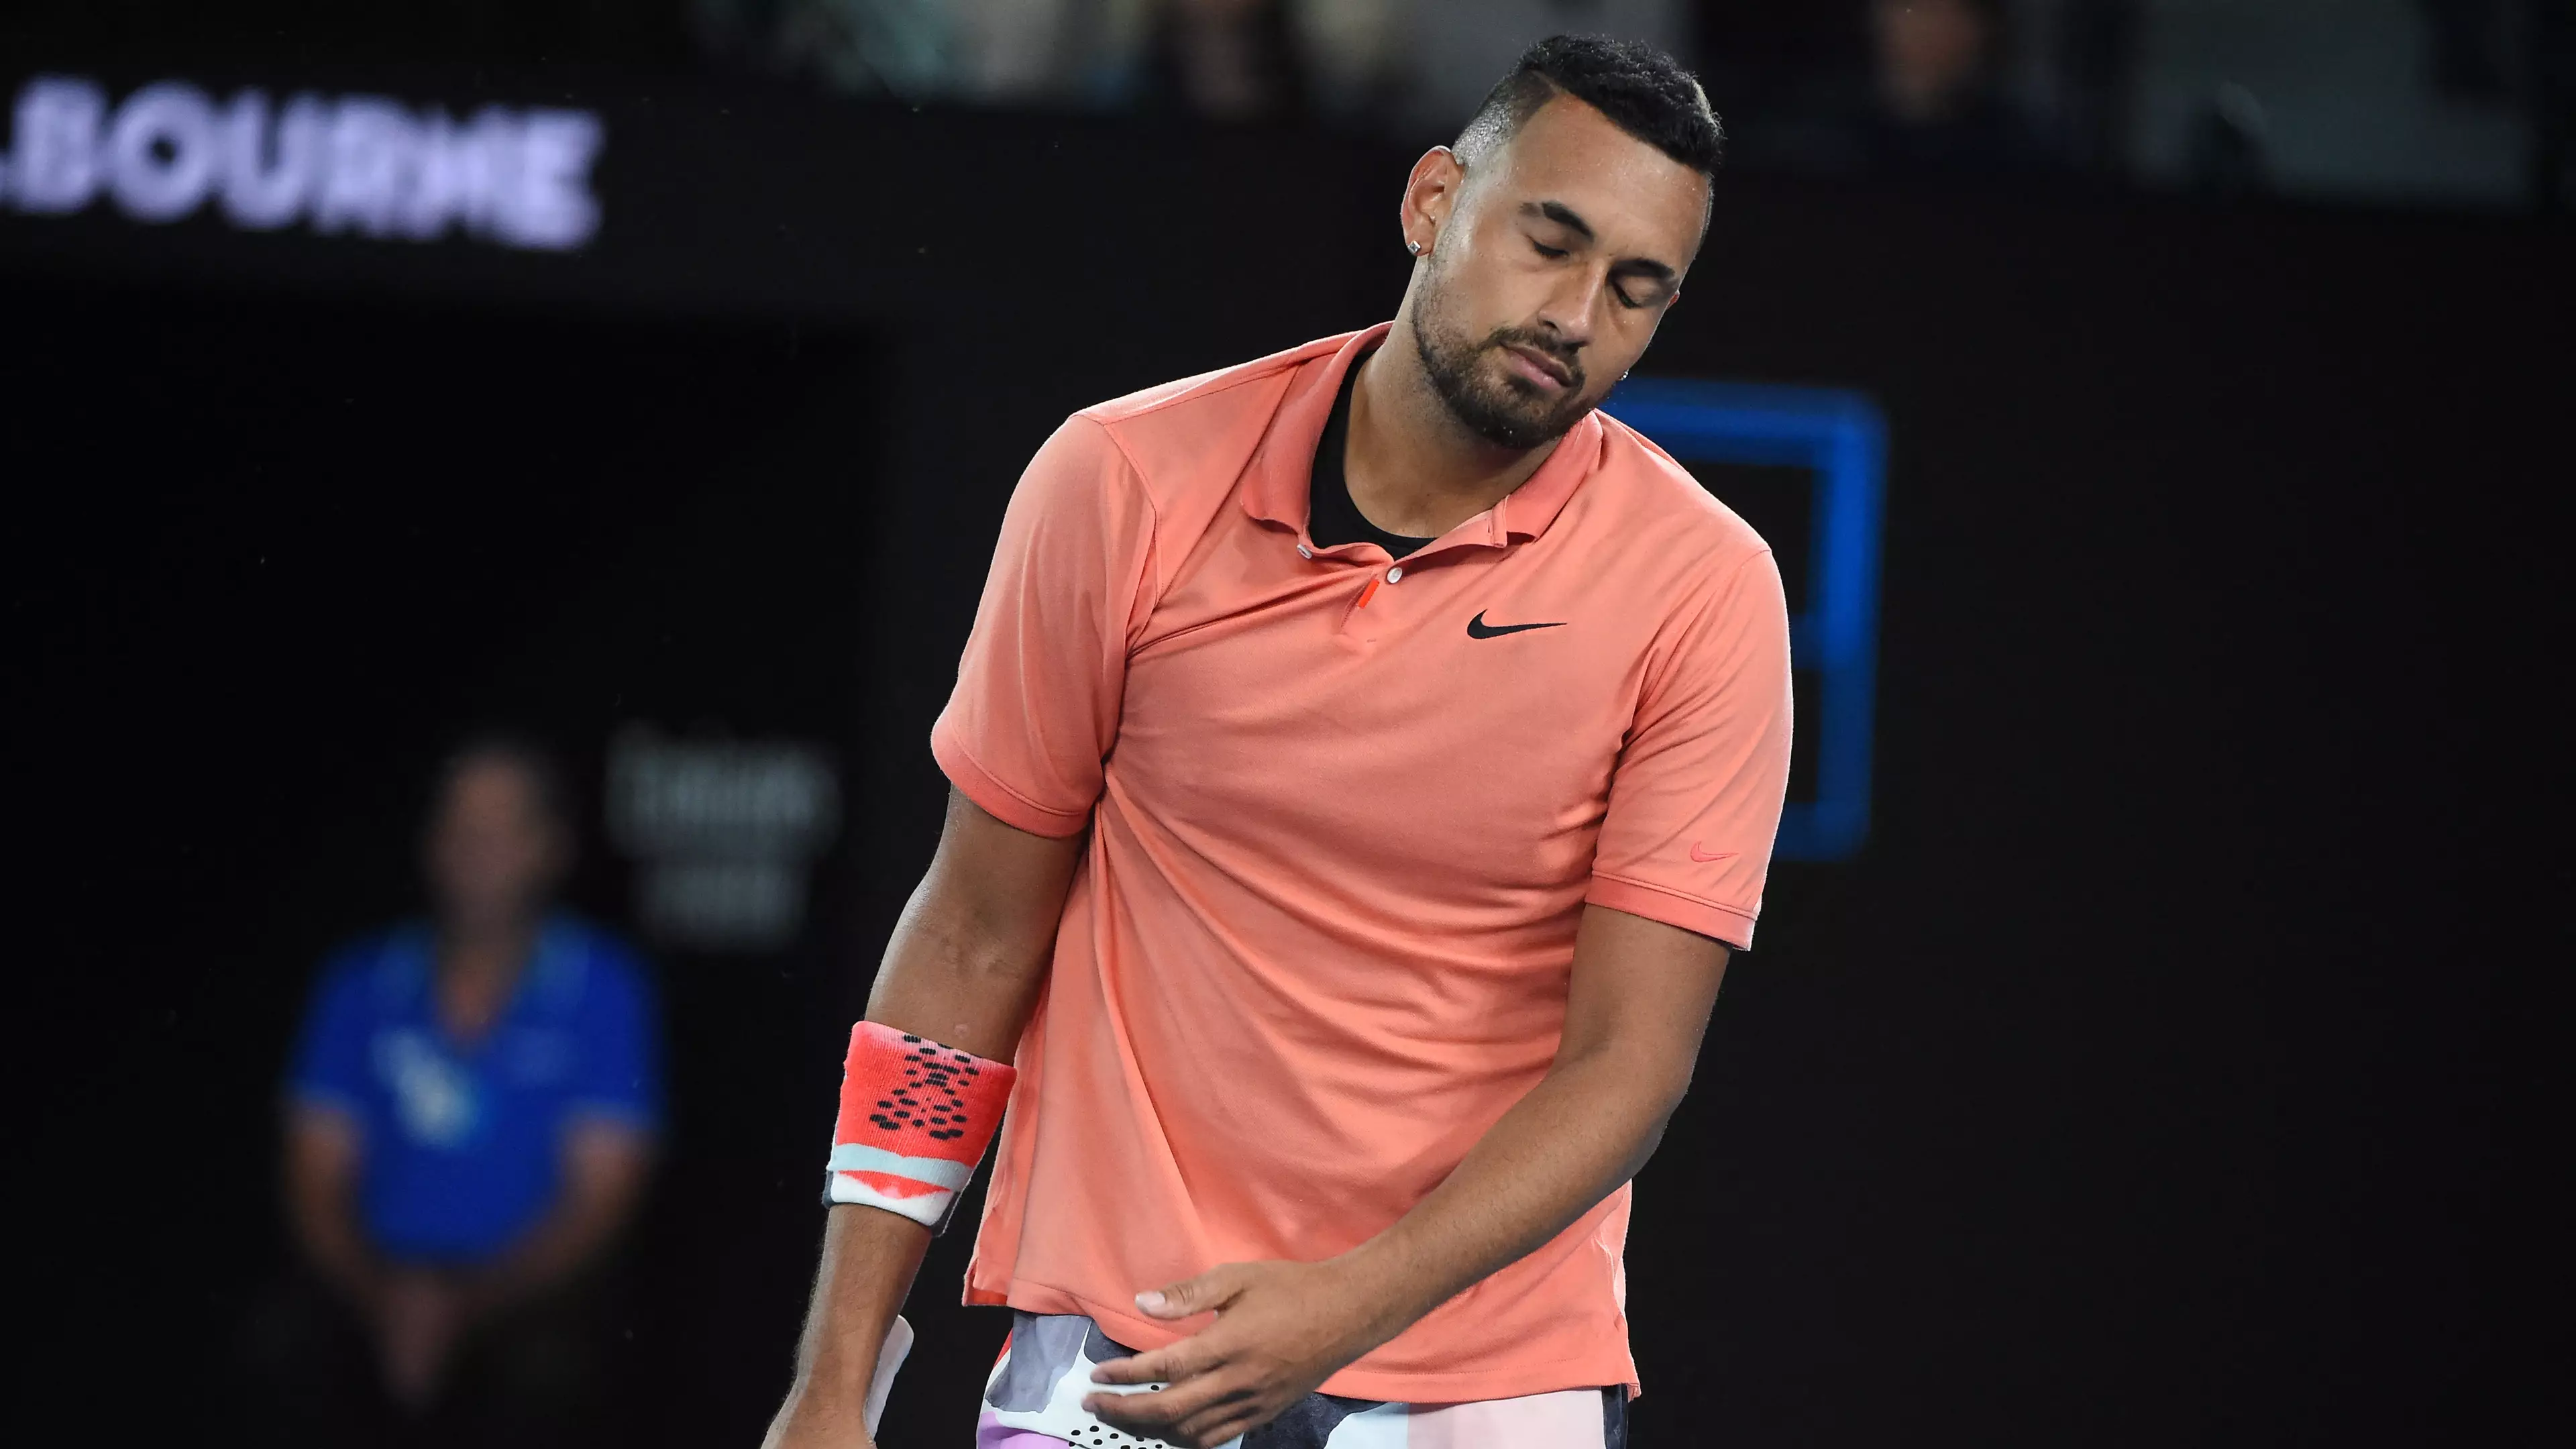 Nick Kyrgios Takes To Twitter To Troll Novak Djokovic Over US Open Incident